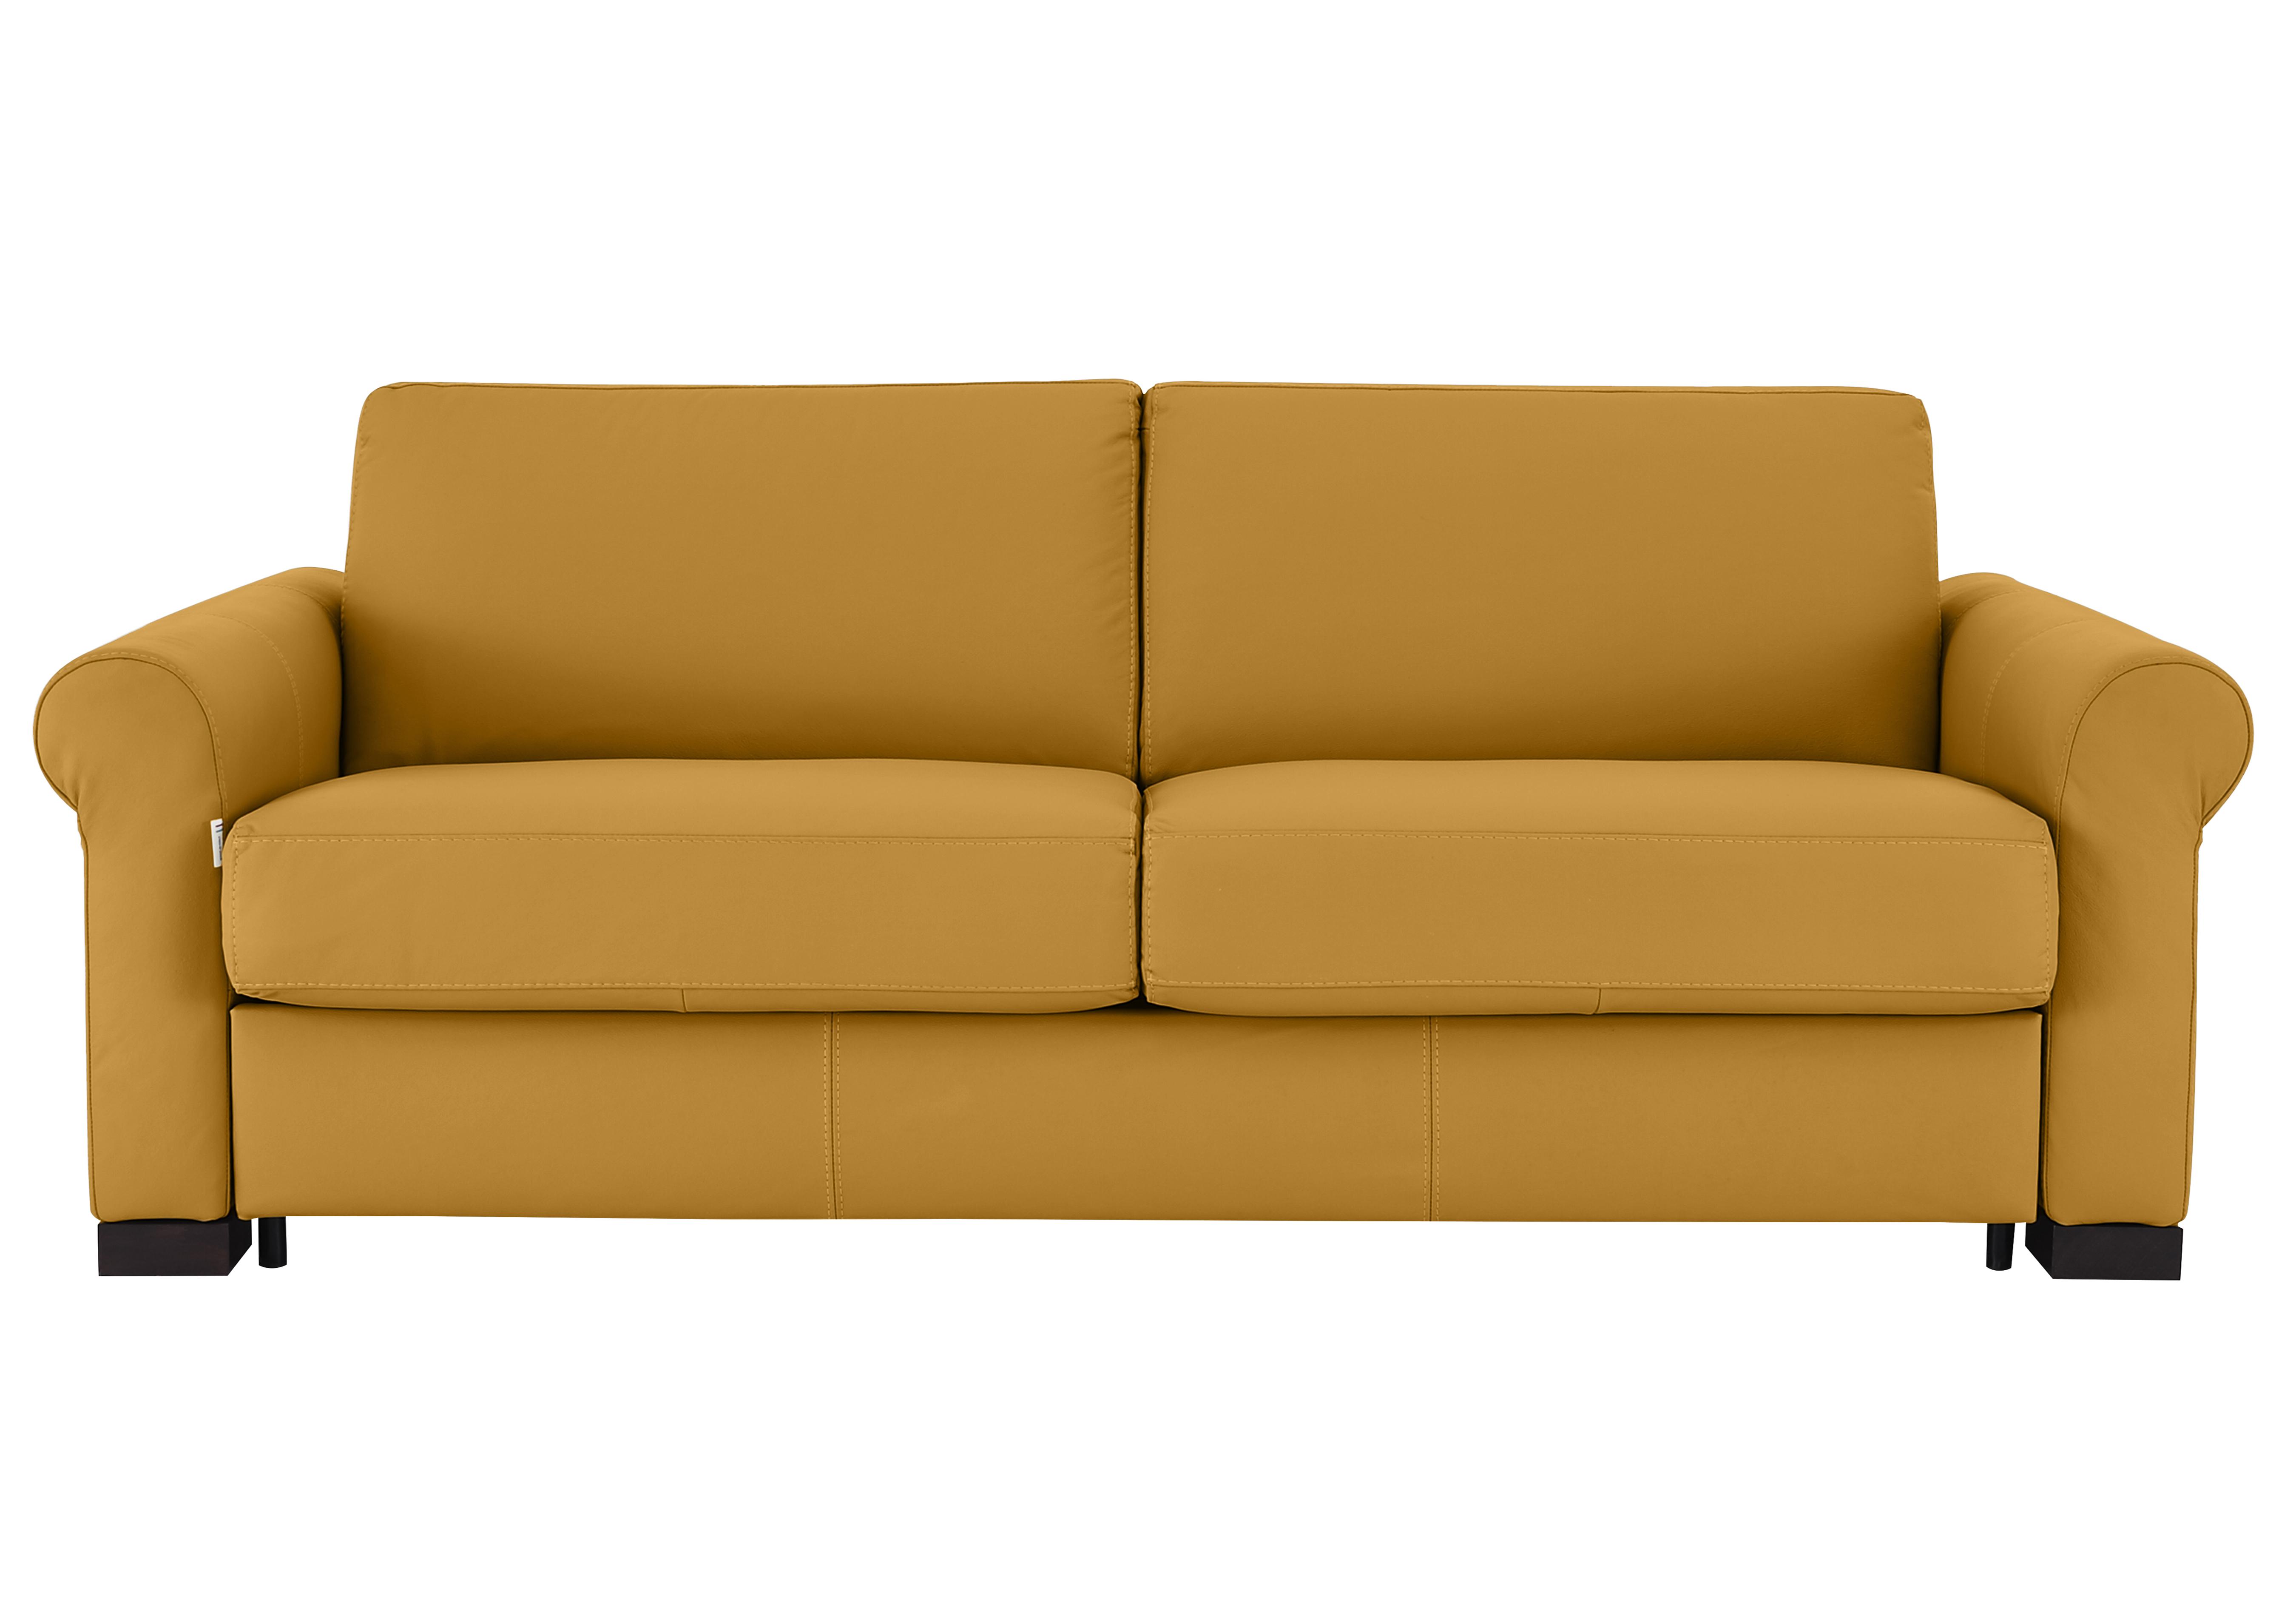 Alcova 3 Seater Leather Sofa Bed with Scroll Arms in Torello Senape 355 on Furniture Village